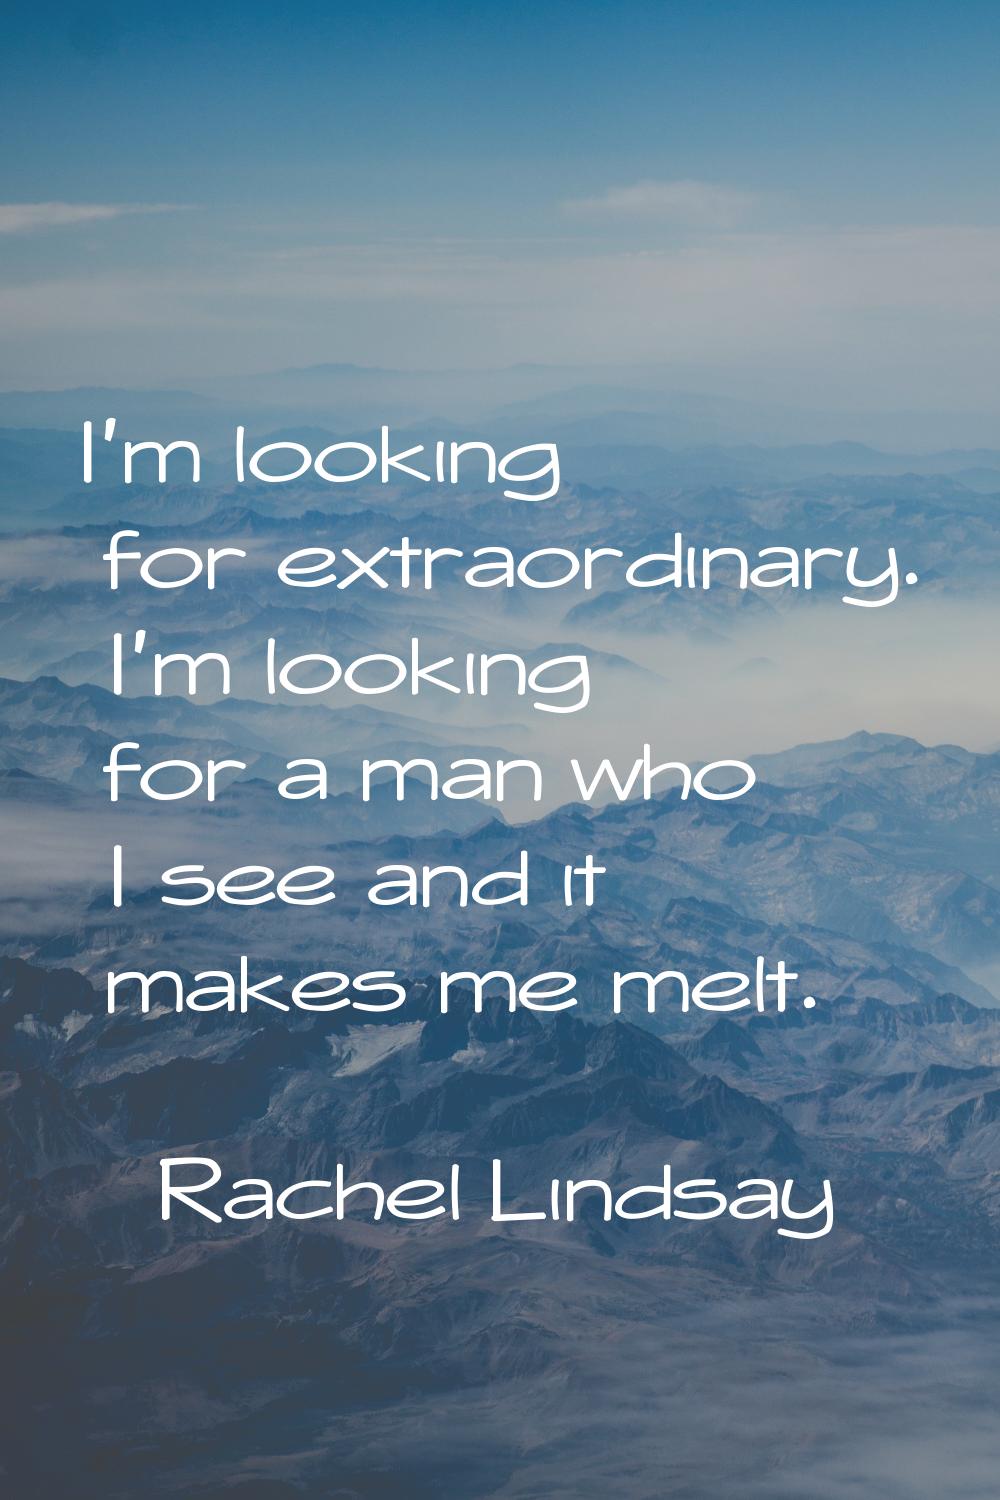 I'm looking for extraordinary. I'm looking for a man who I see and it makes me melt.